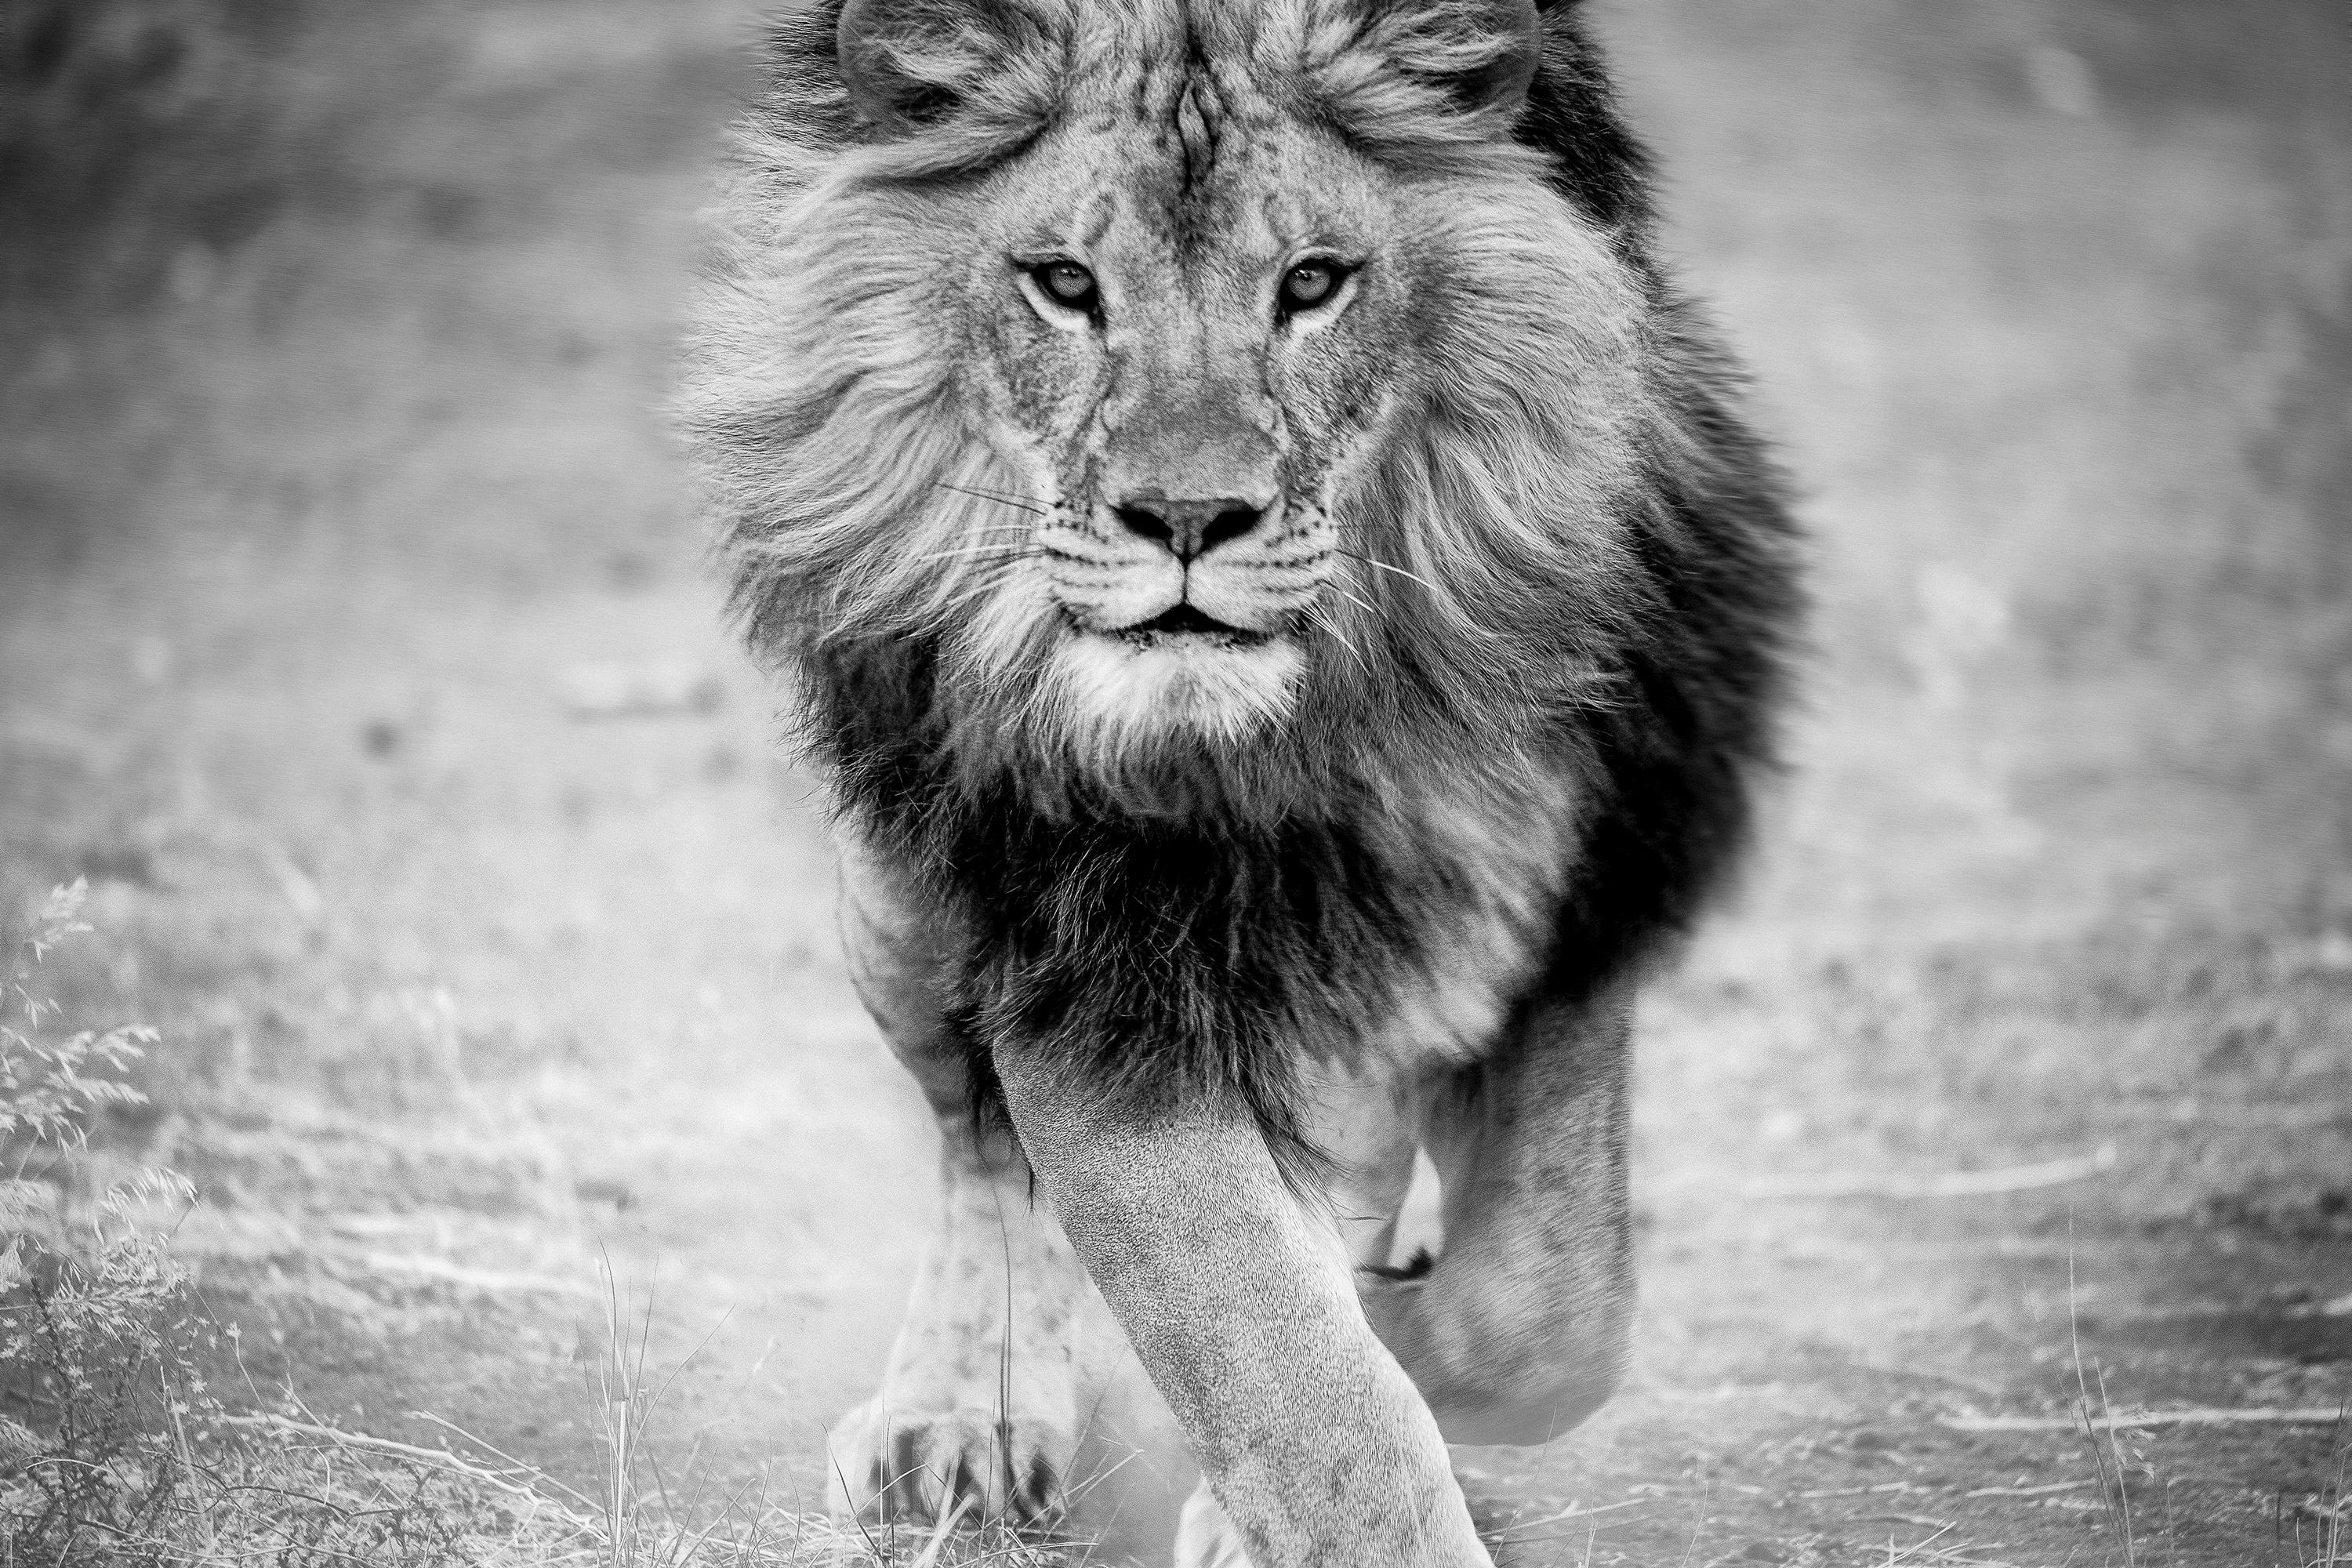 This is a black and white photograph of an African Lion by Shane Russeck. 
Printed on Archival Paper Using Archival ink
Singed and numbered
Edition of 25
Framing Options Available

 Shane Russeck has built a reputation for capturing America's